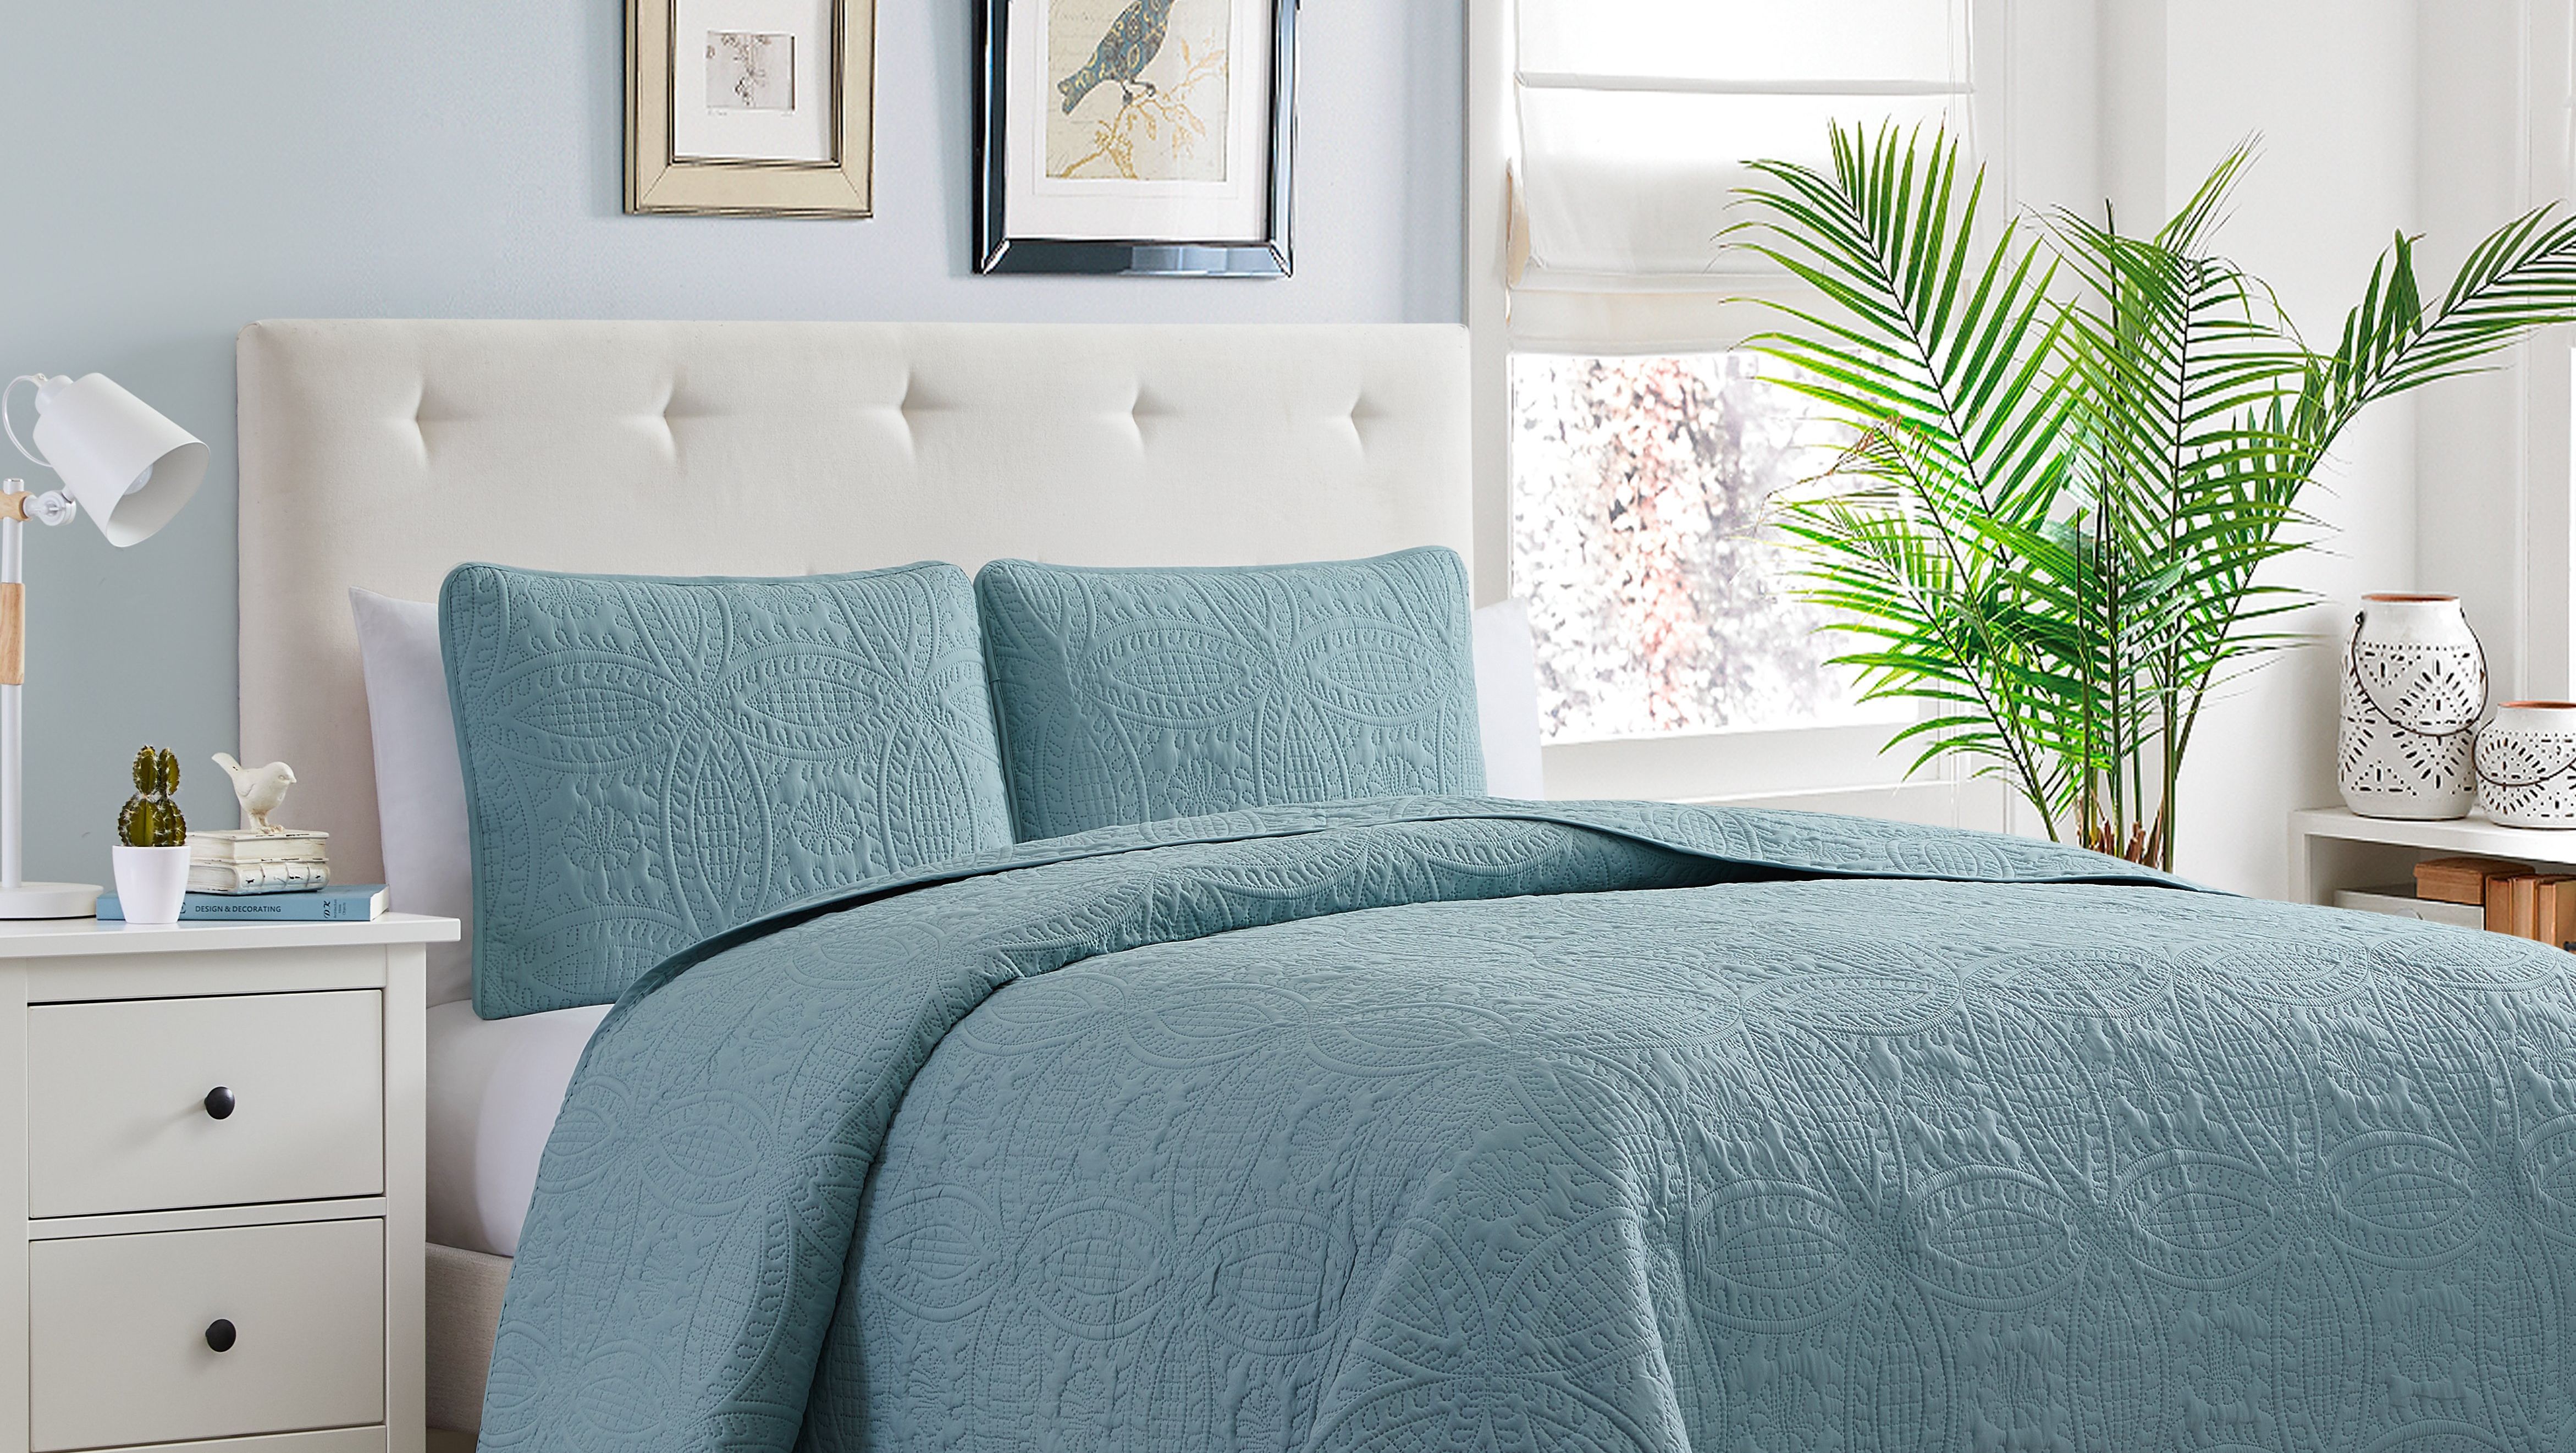 More Than 40,000 Amazon Reviewers Are Obsessed with These $25 Bedsheets ...